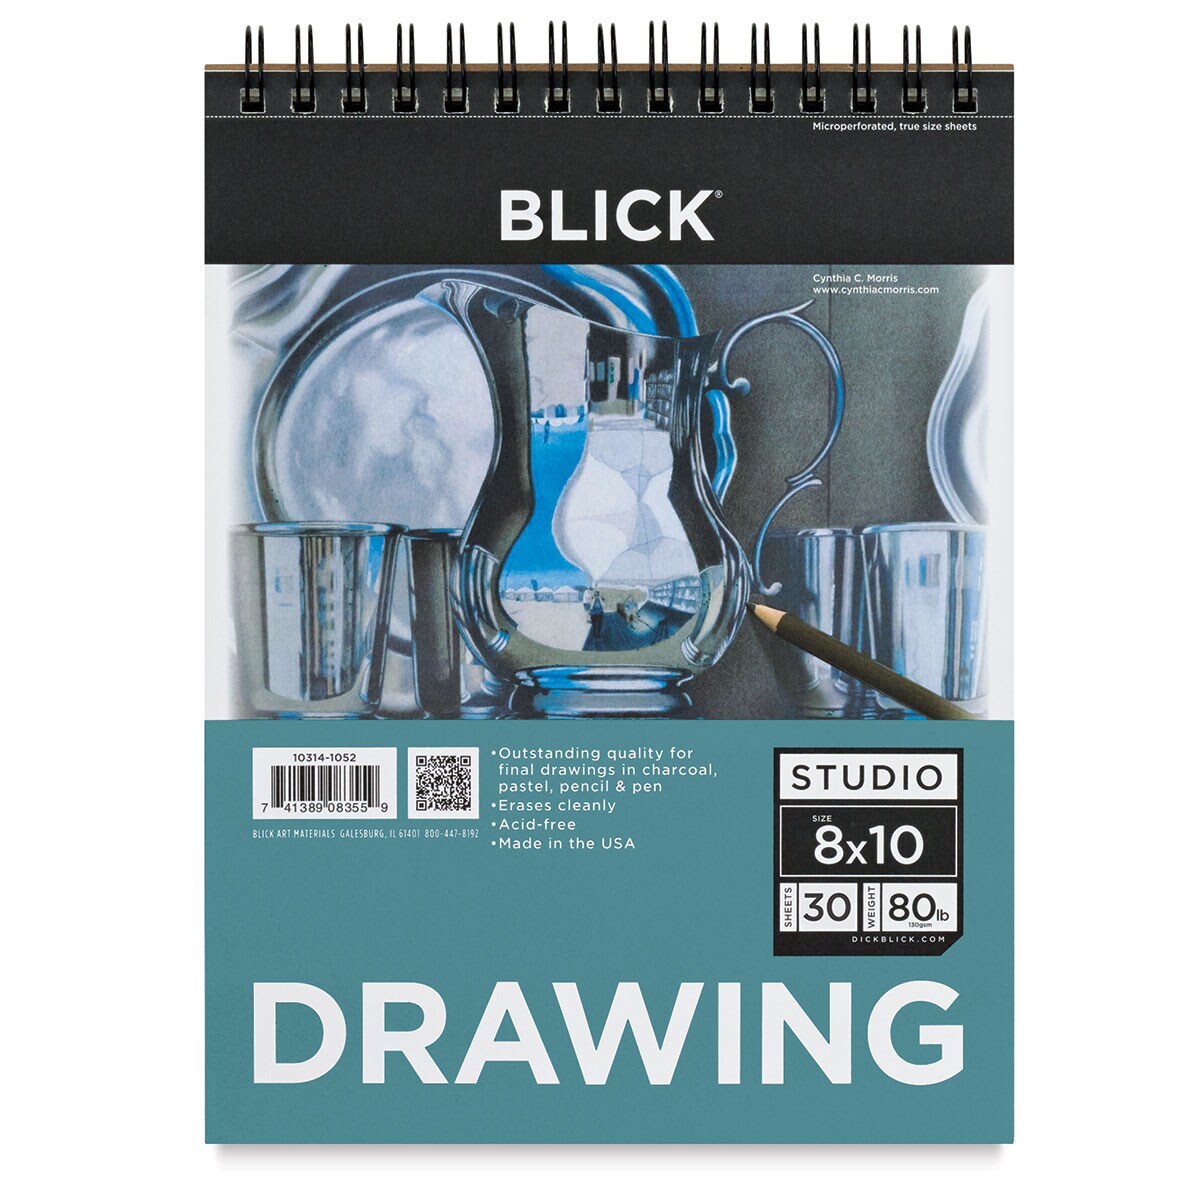 Blick Studio Drawing Pad - 8 inch x 10 inch, 30 Sheets, Other